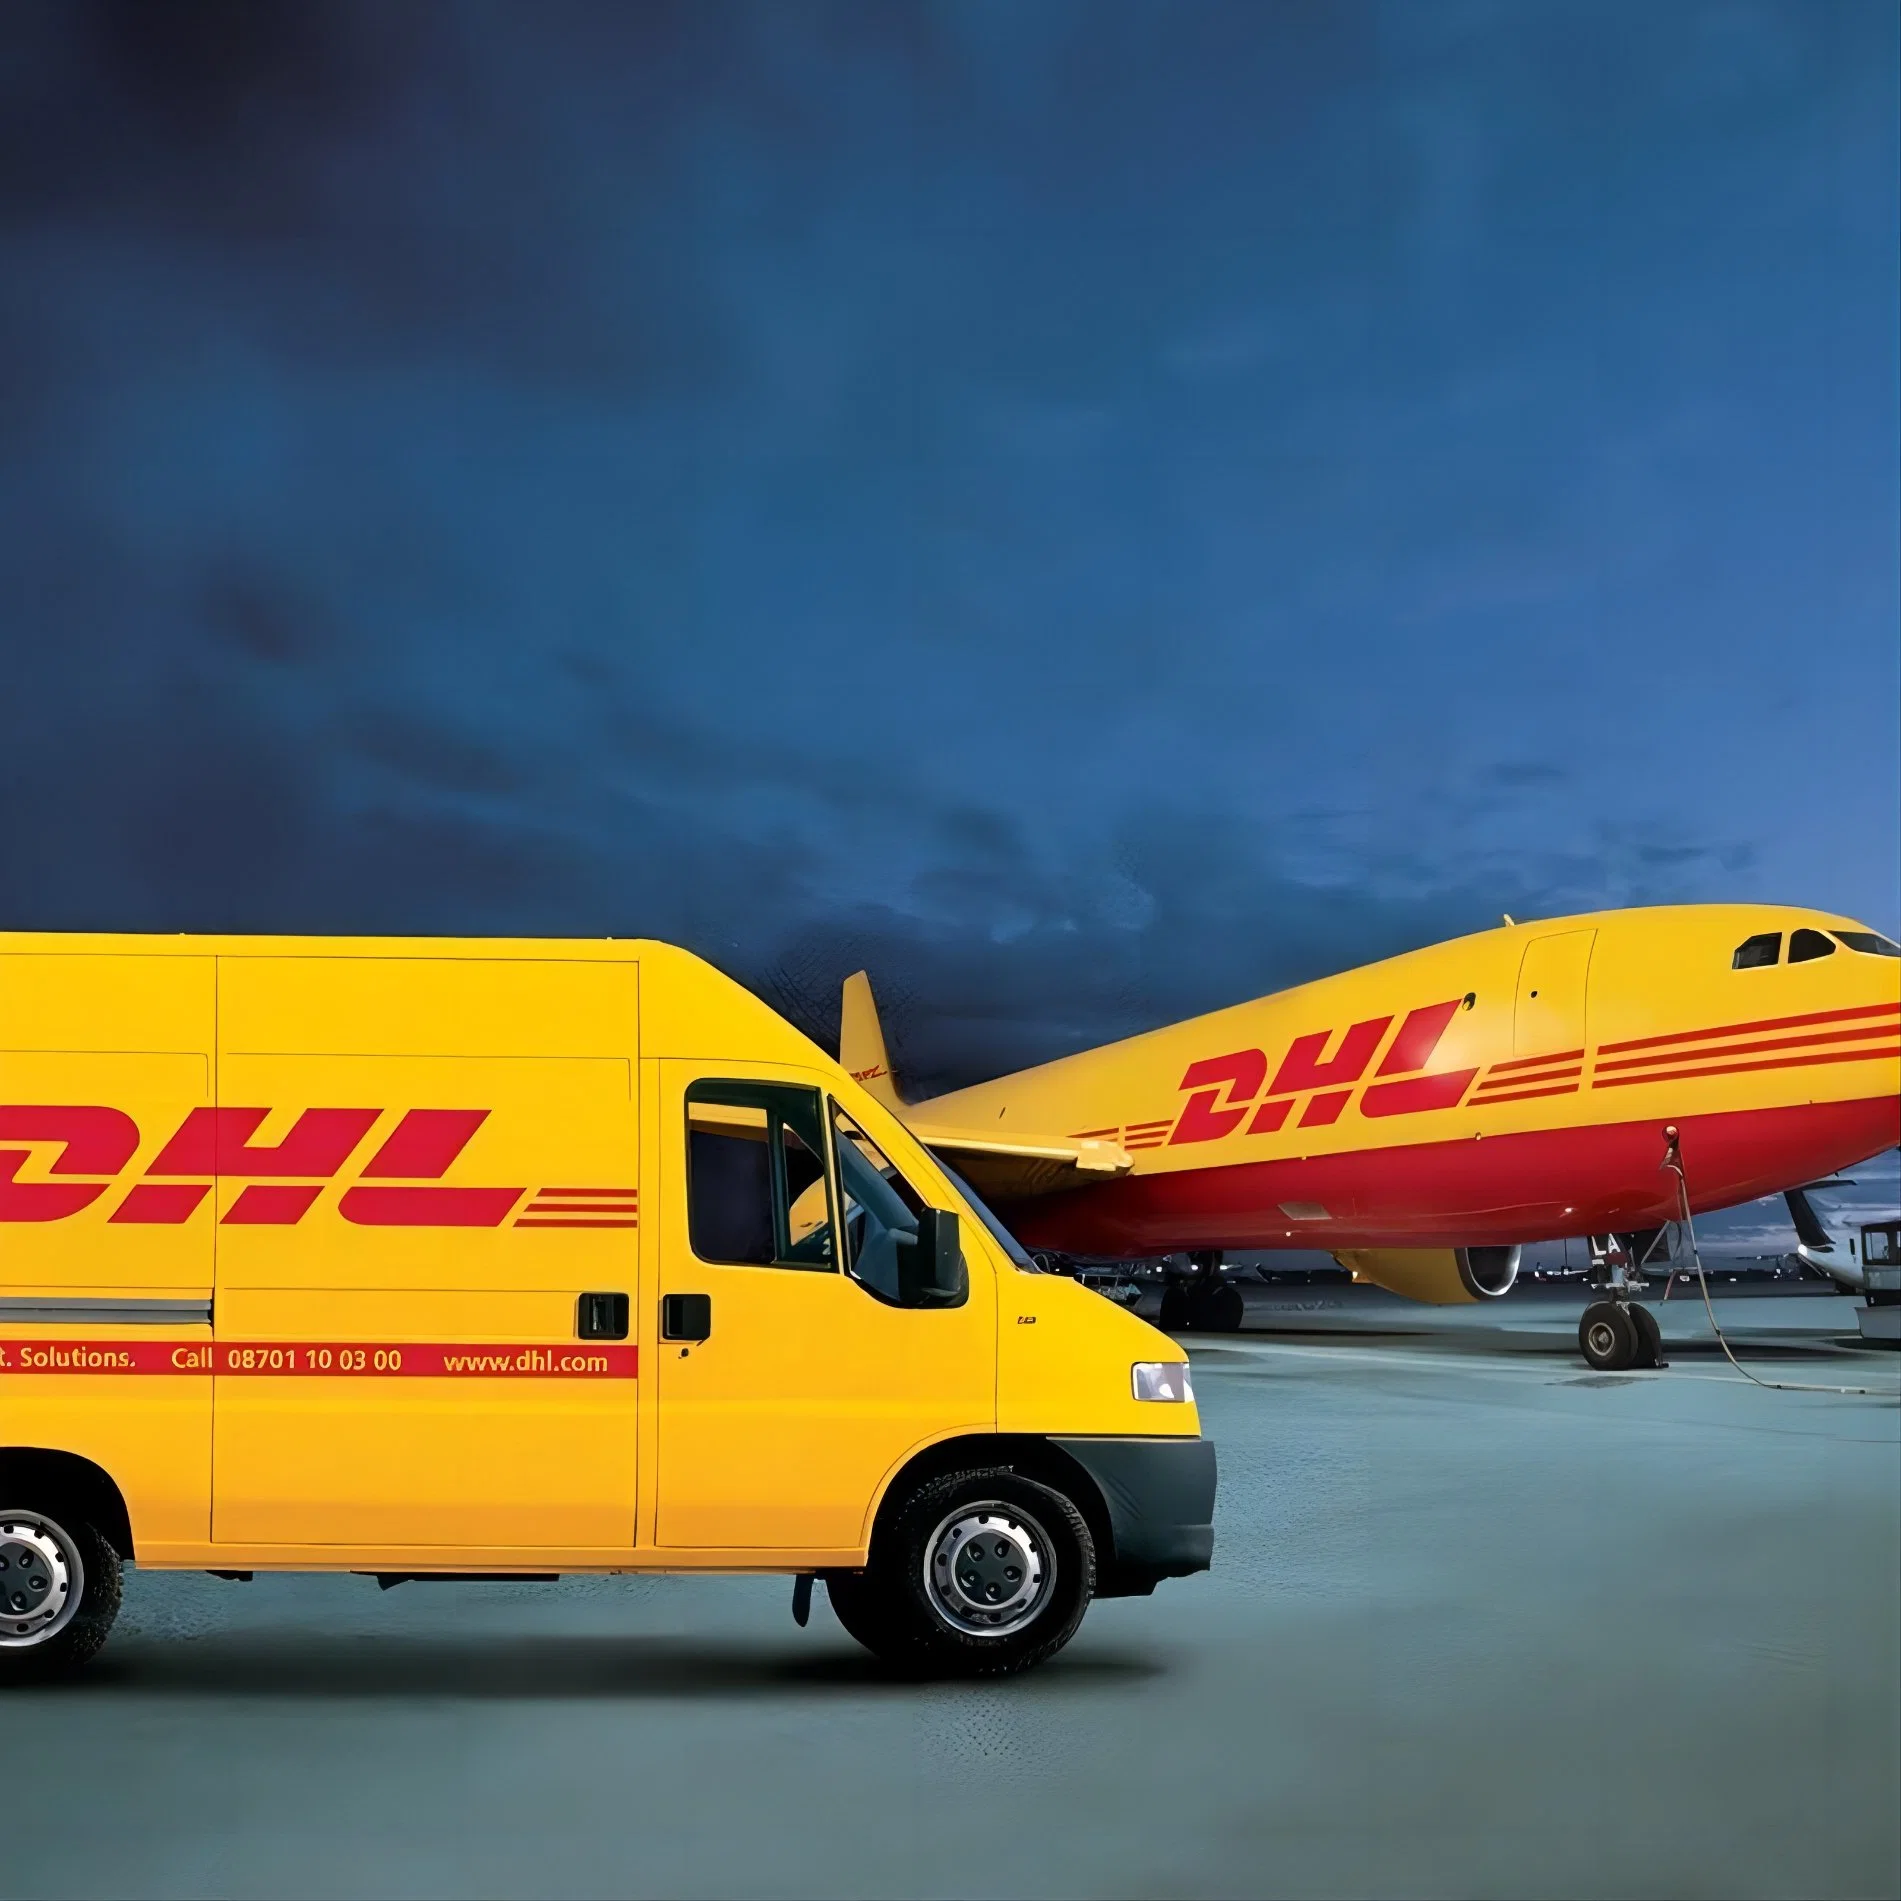 Ultra Low DHL Shipping Cost to Chile